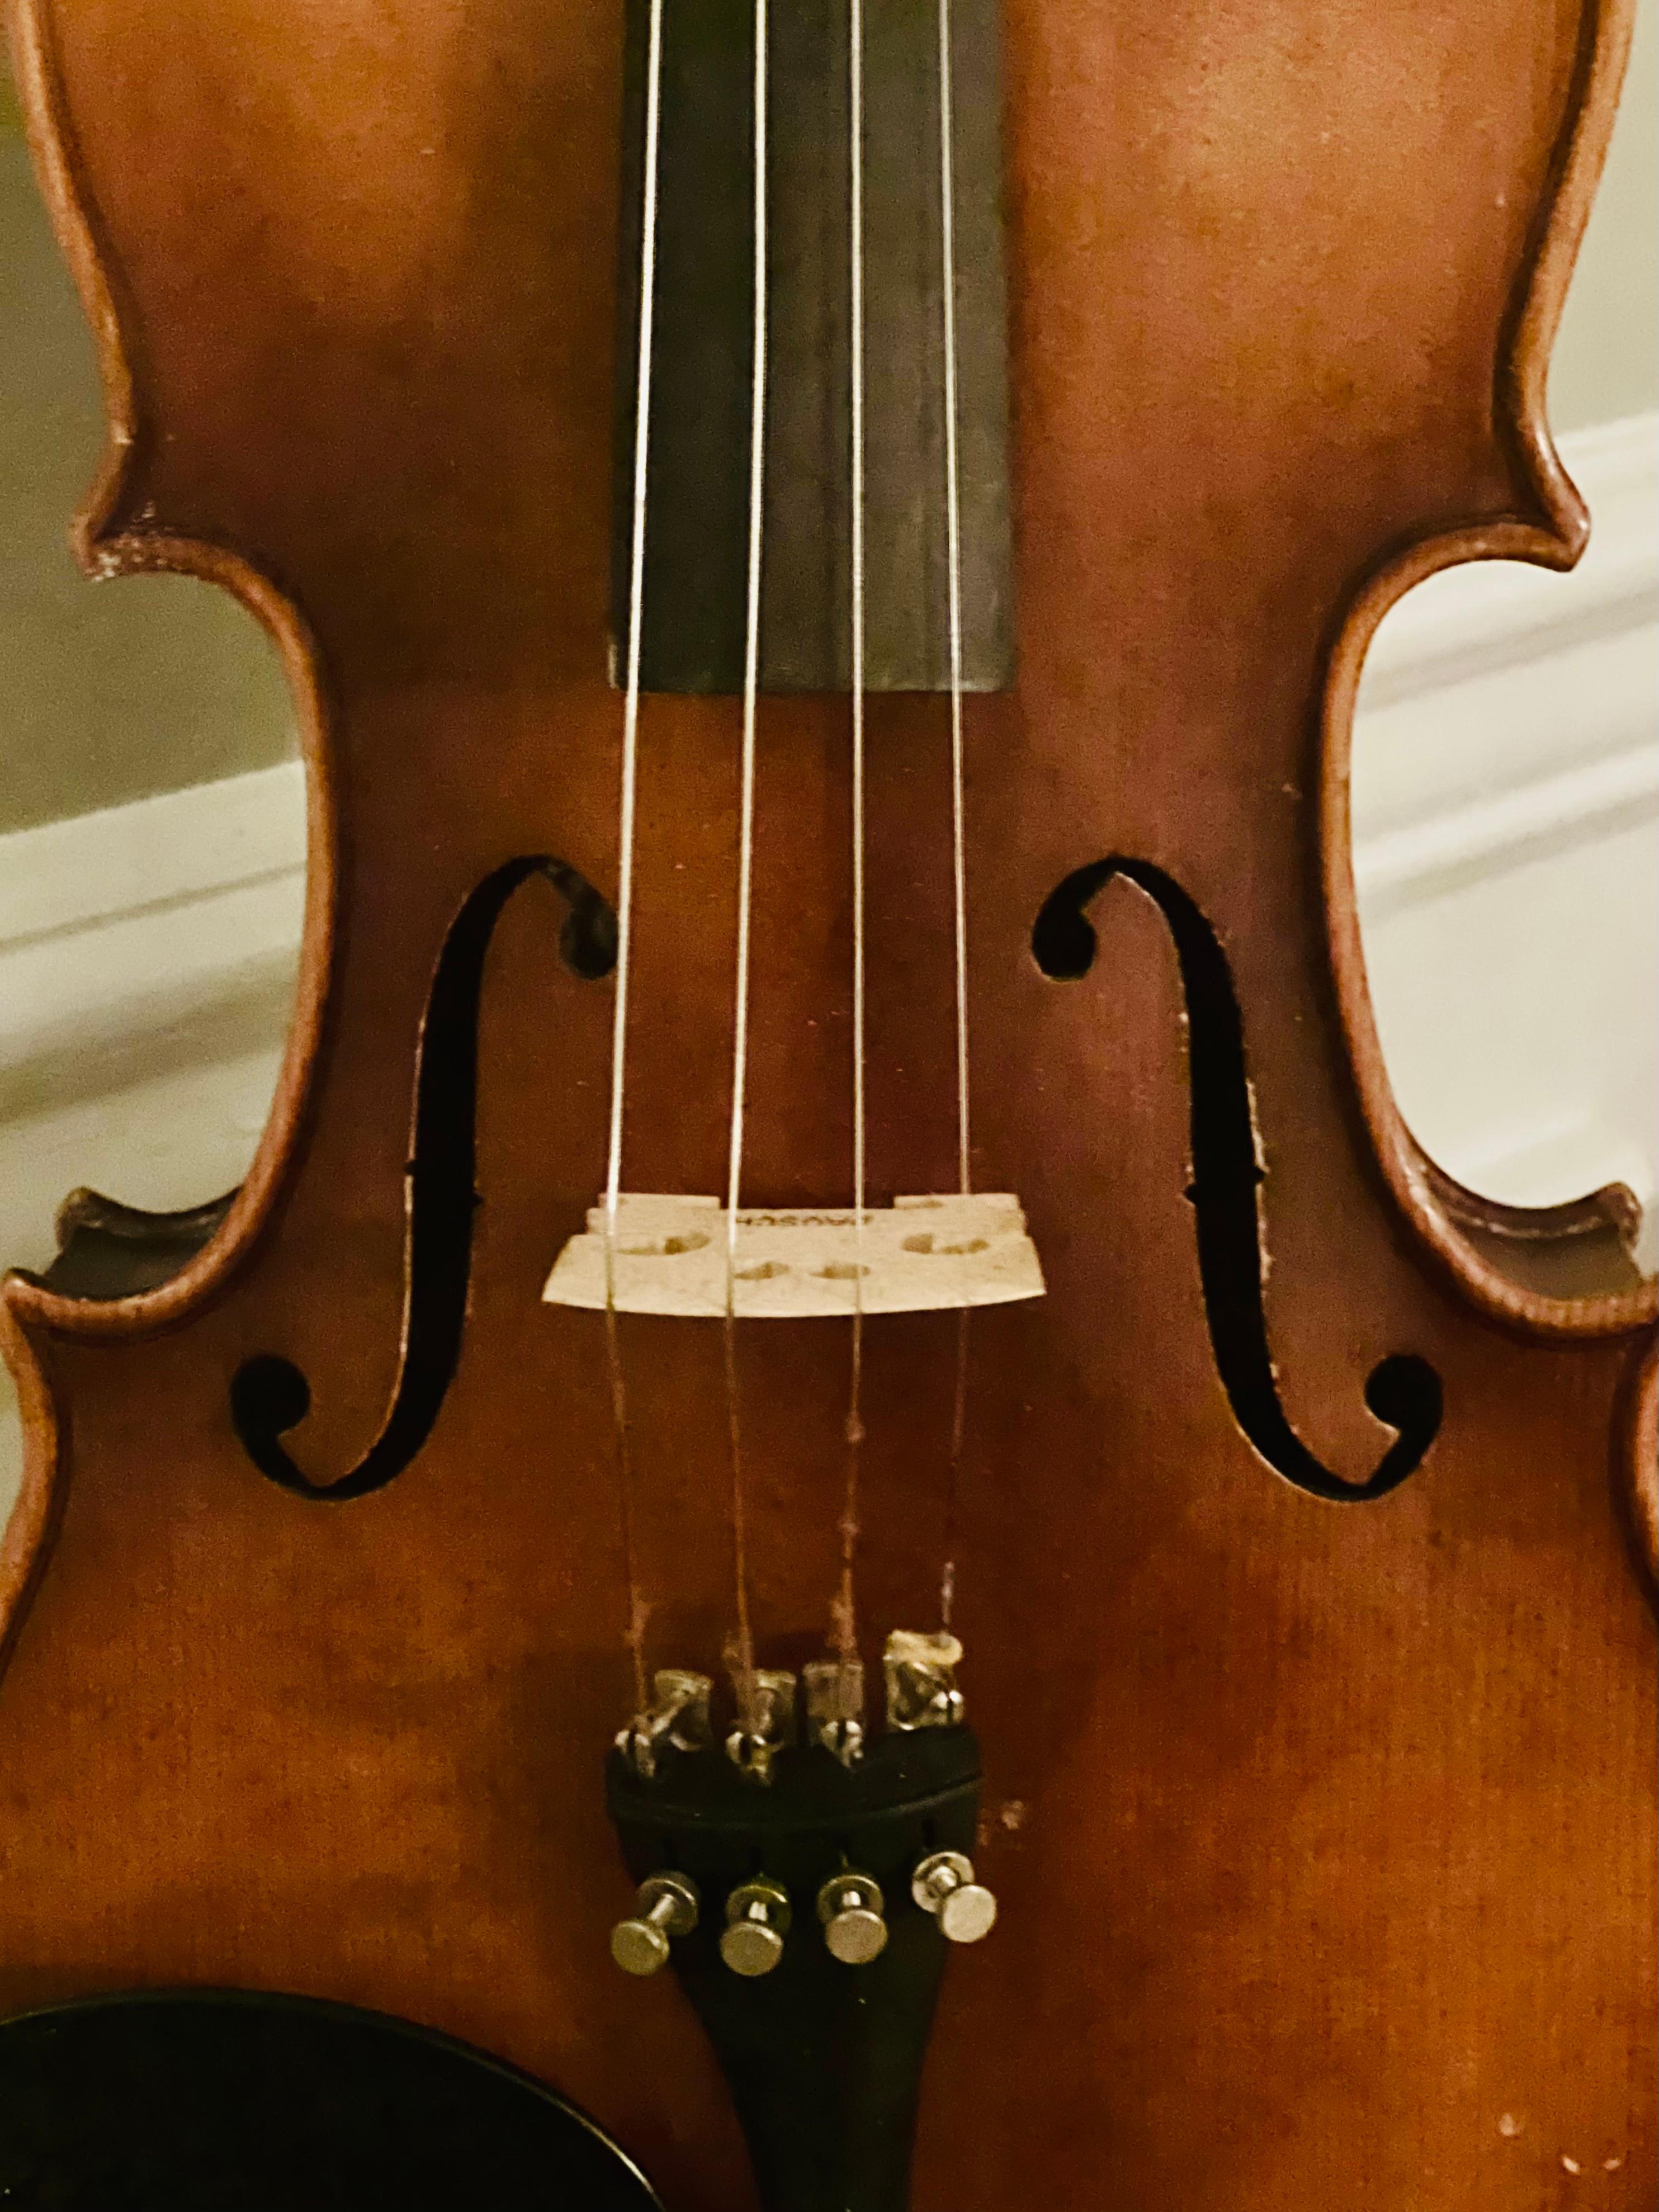 1970 3/4 E.R. Pfretzschner Hand-Crafted Violin in the Style of A. Stradivarius (Holz) im Angebot